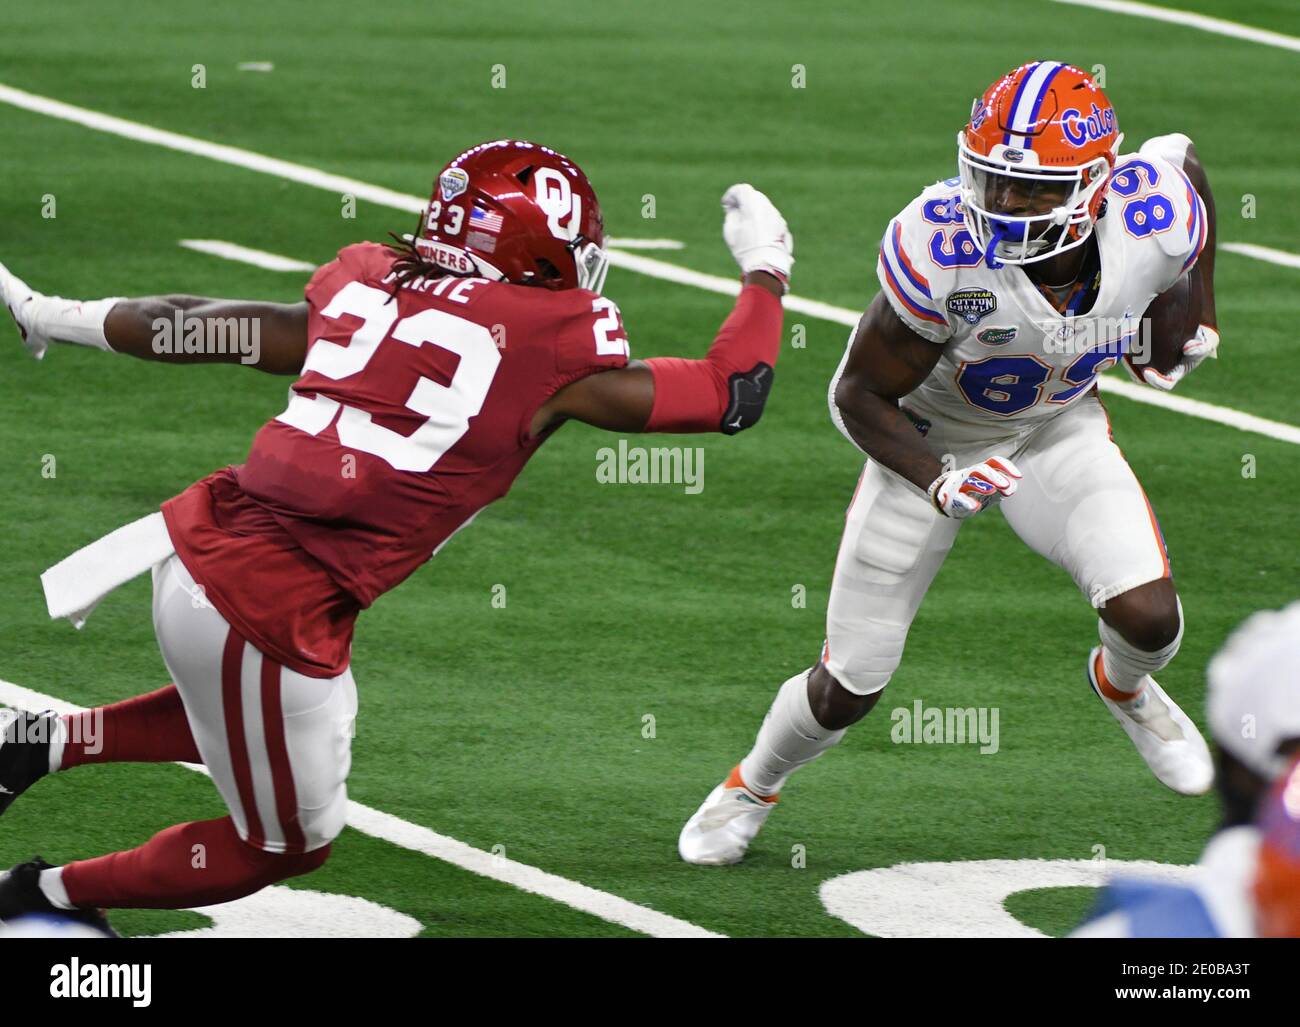 Arlington, United States. 30th Dec, 2020. Oklahoma's DeShawn White closes in on Florida's Justn Shorter during the first half of the Goodyear Cotton Bowl Classic on Wednesday, December 30, 2020 at AT&T Stadium in Arlington, Texas. Photo by Ian Halperin/UPI Credit: UPI/Alamy Live News Stock Photo